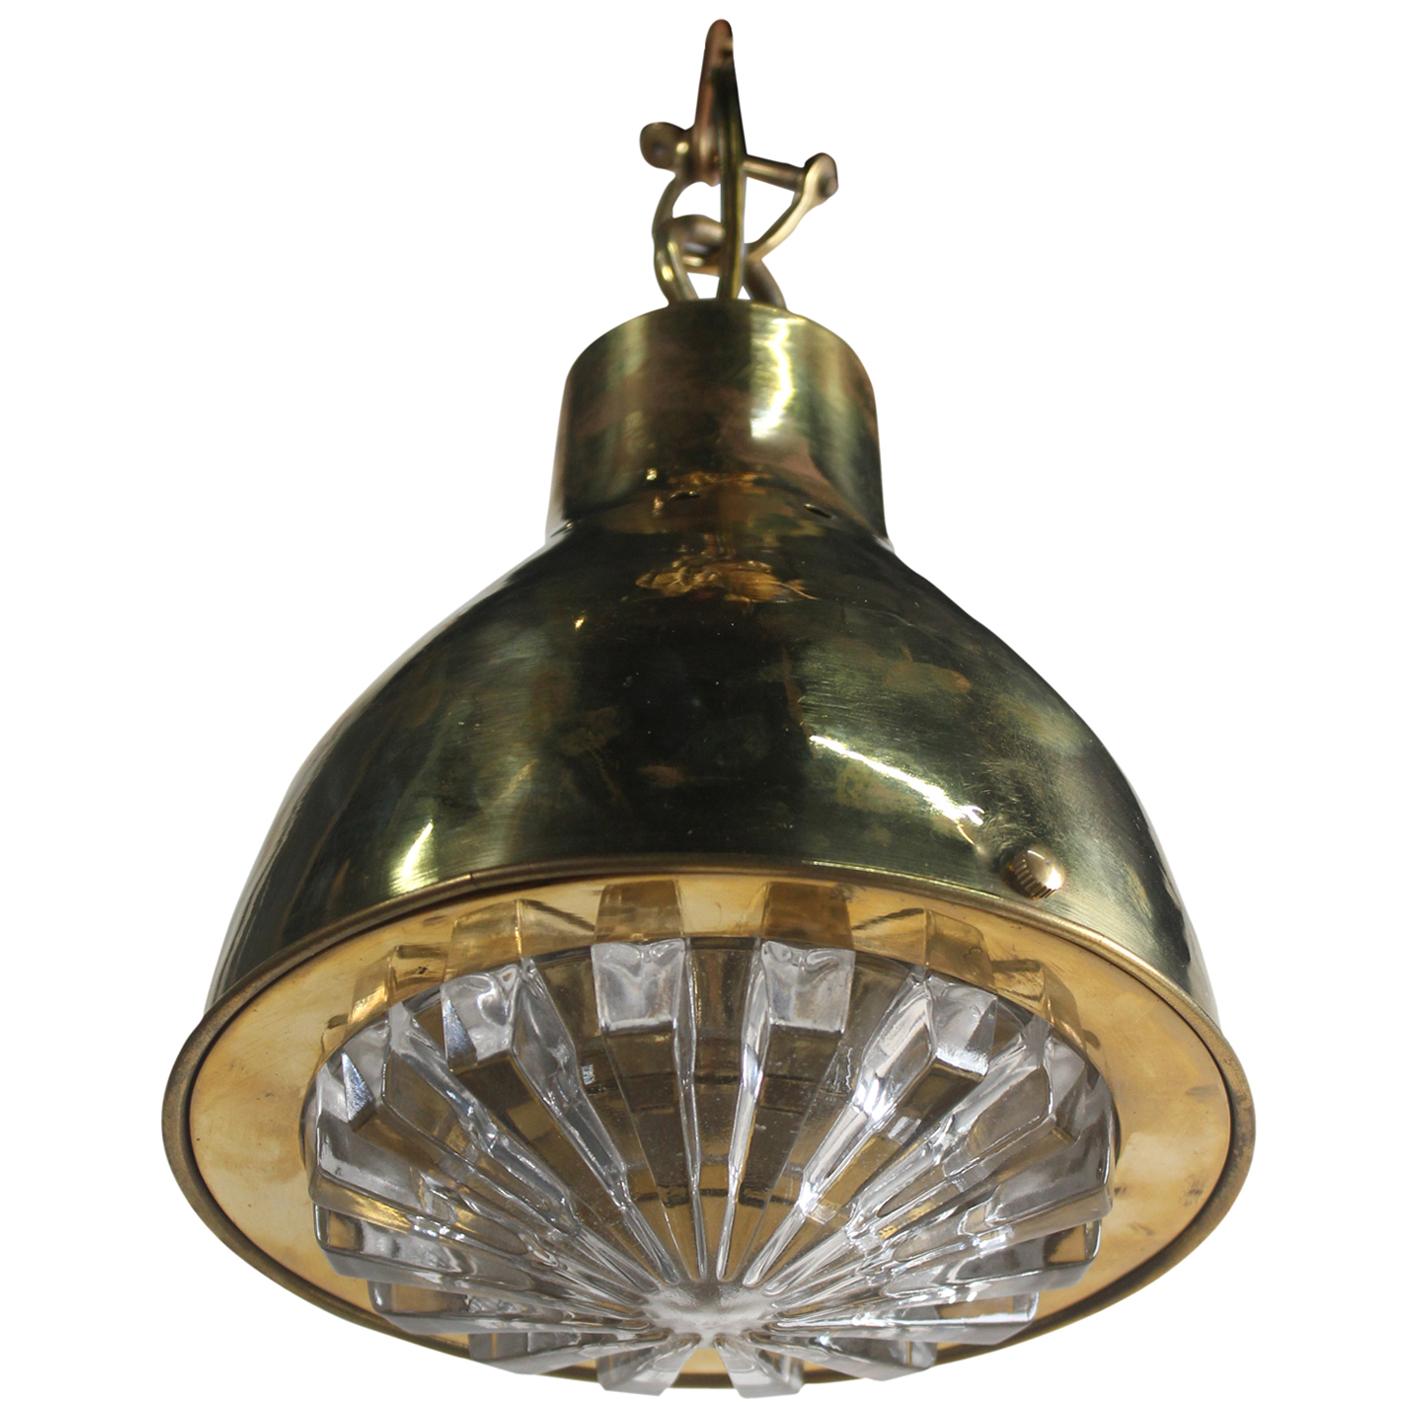 Brass Nautical Pendant Ceiling Light with Fresnel Lens Shade, 1970s